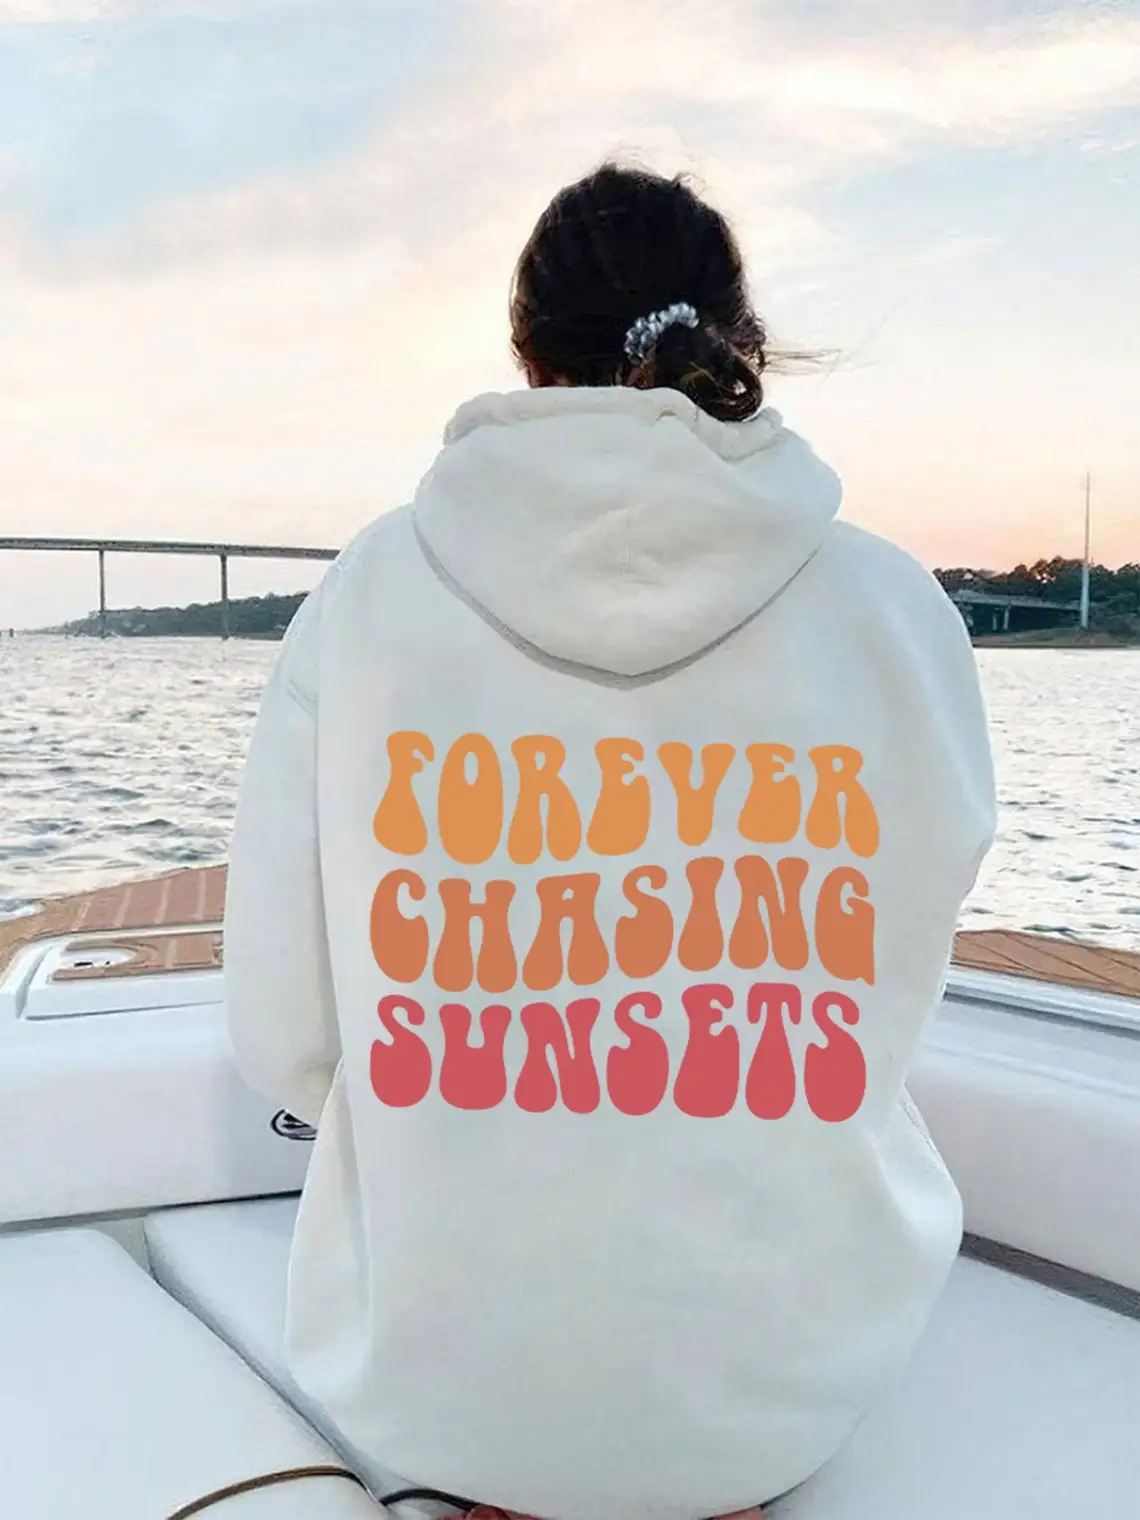 Forever Chasing Sunset Hoodie Aesthetic slogan quote women fashion youngs hipster vintage cotton pullovers gift warmer art tops